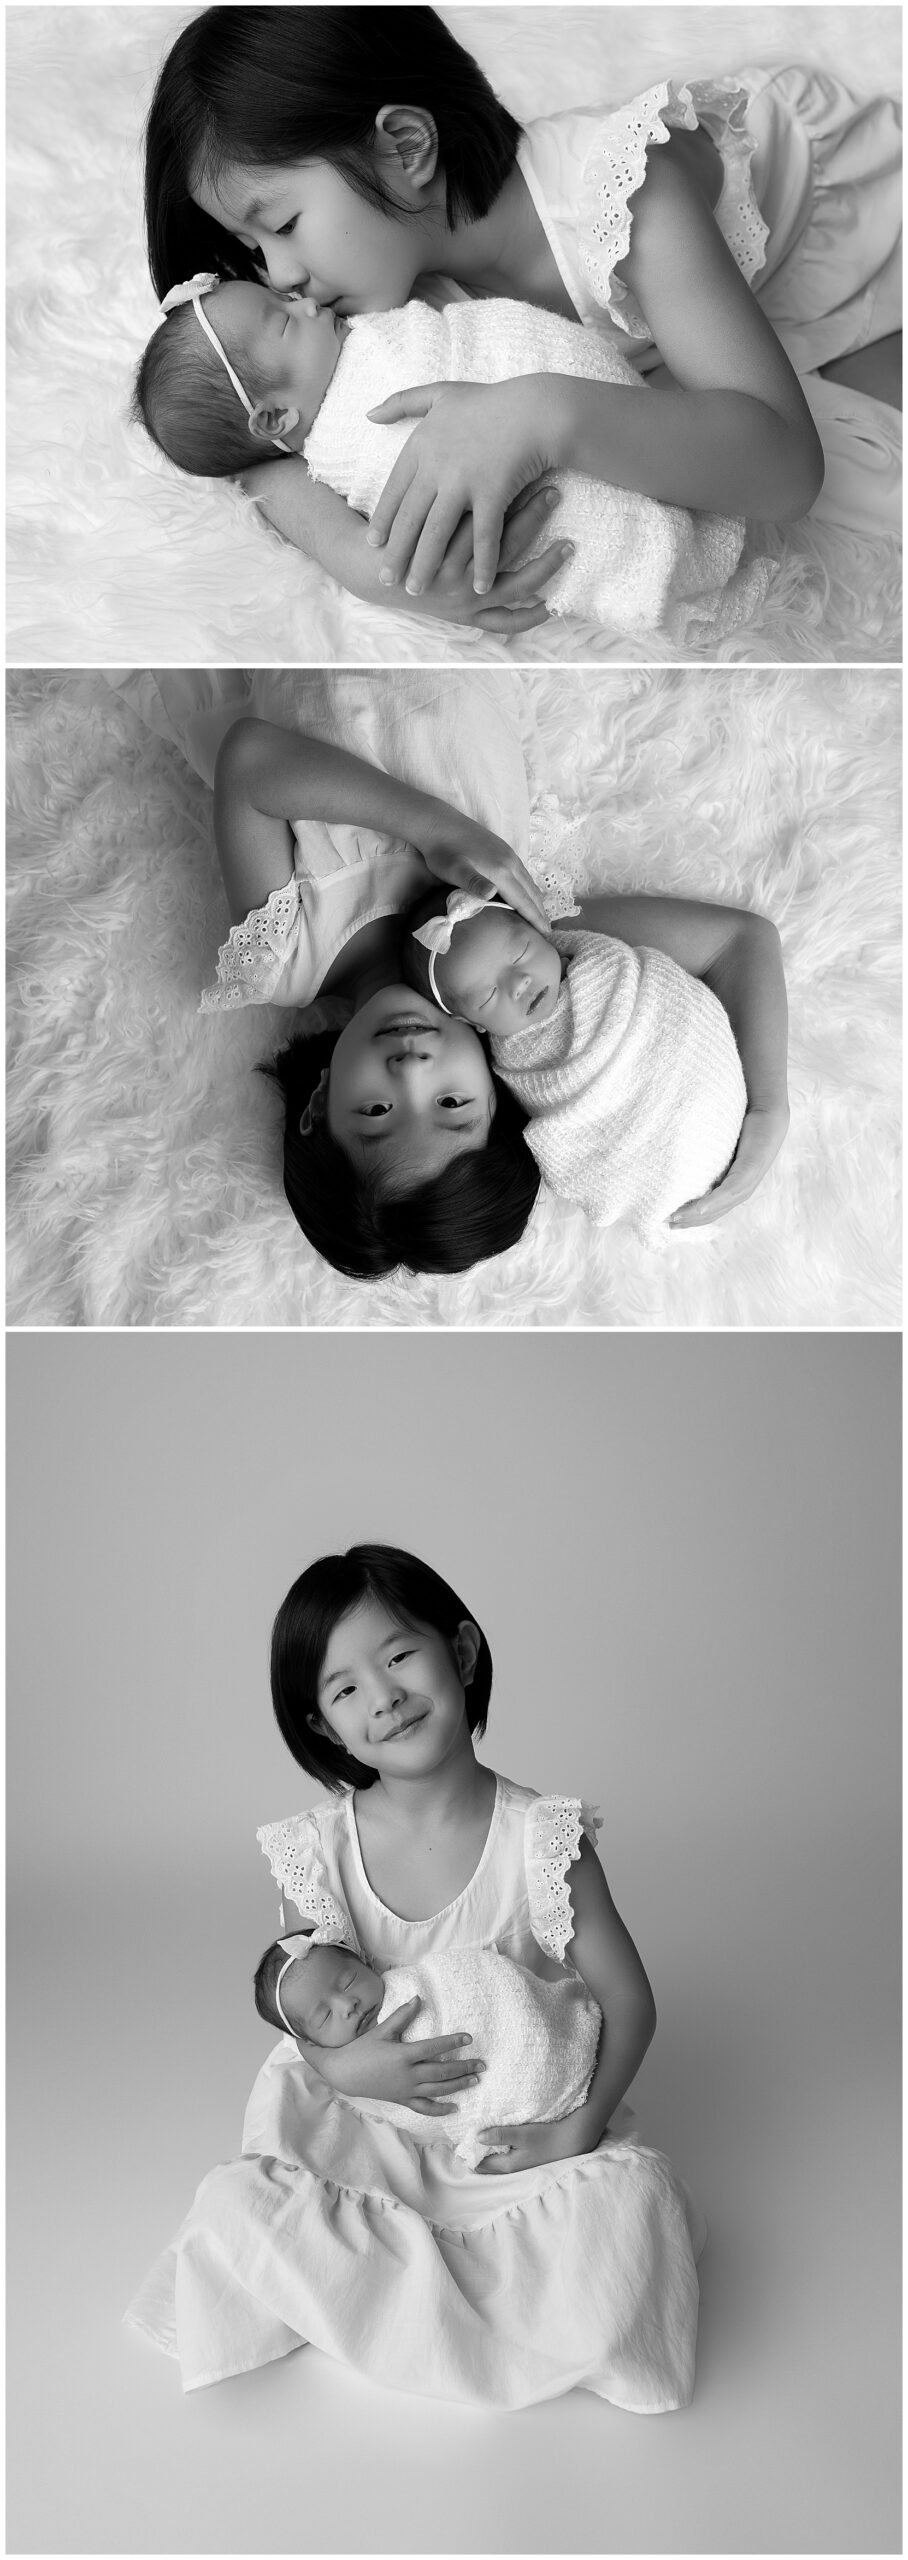 Three black and white photos with a little girl in a white dress and a newborn baby wrapped in white. Taken in Austin family photography studio.